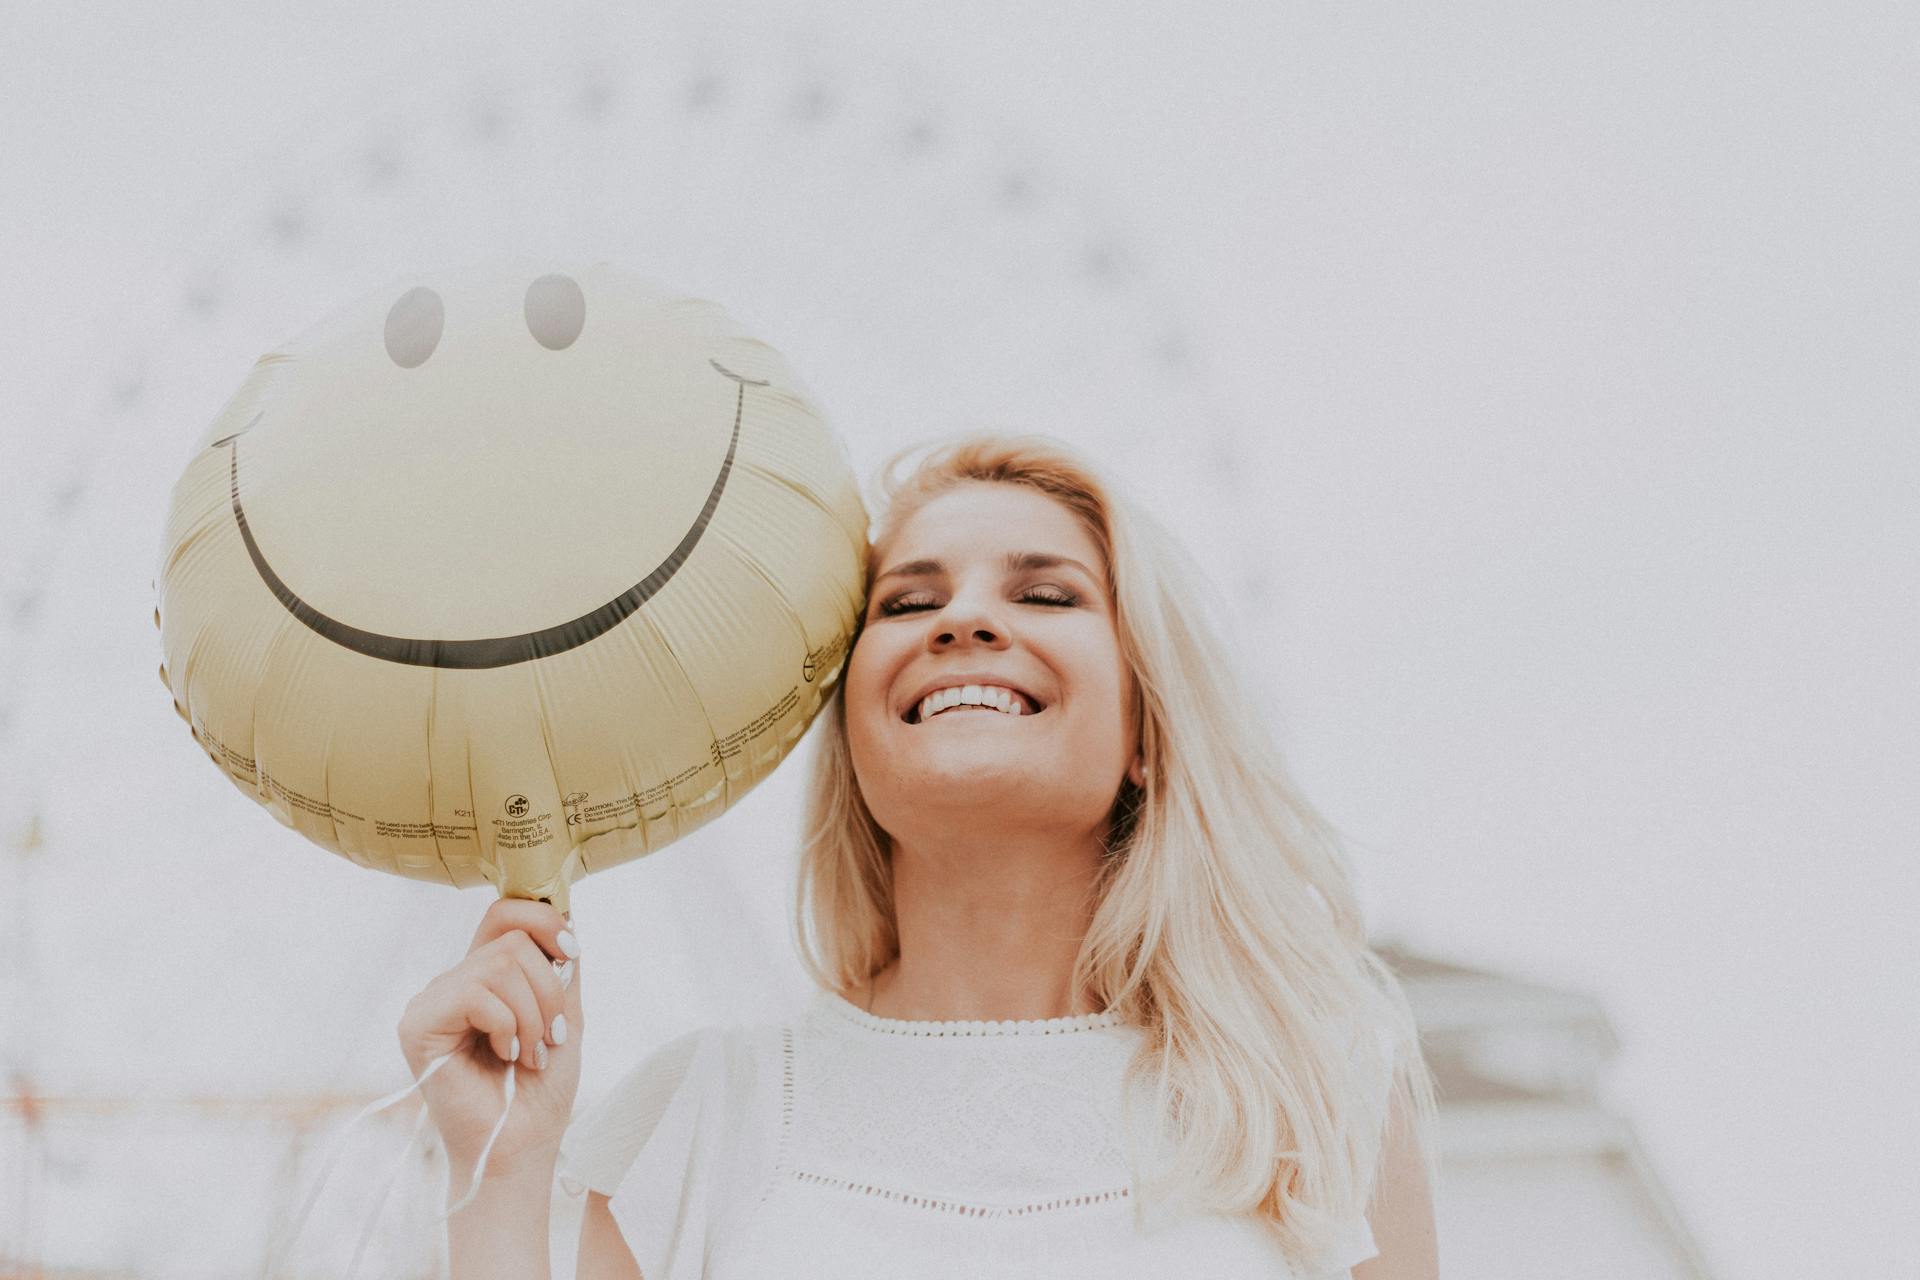 A smiling woman holding a balloon | Source: Pexels